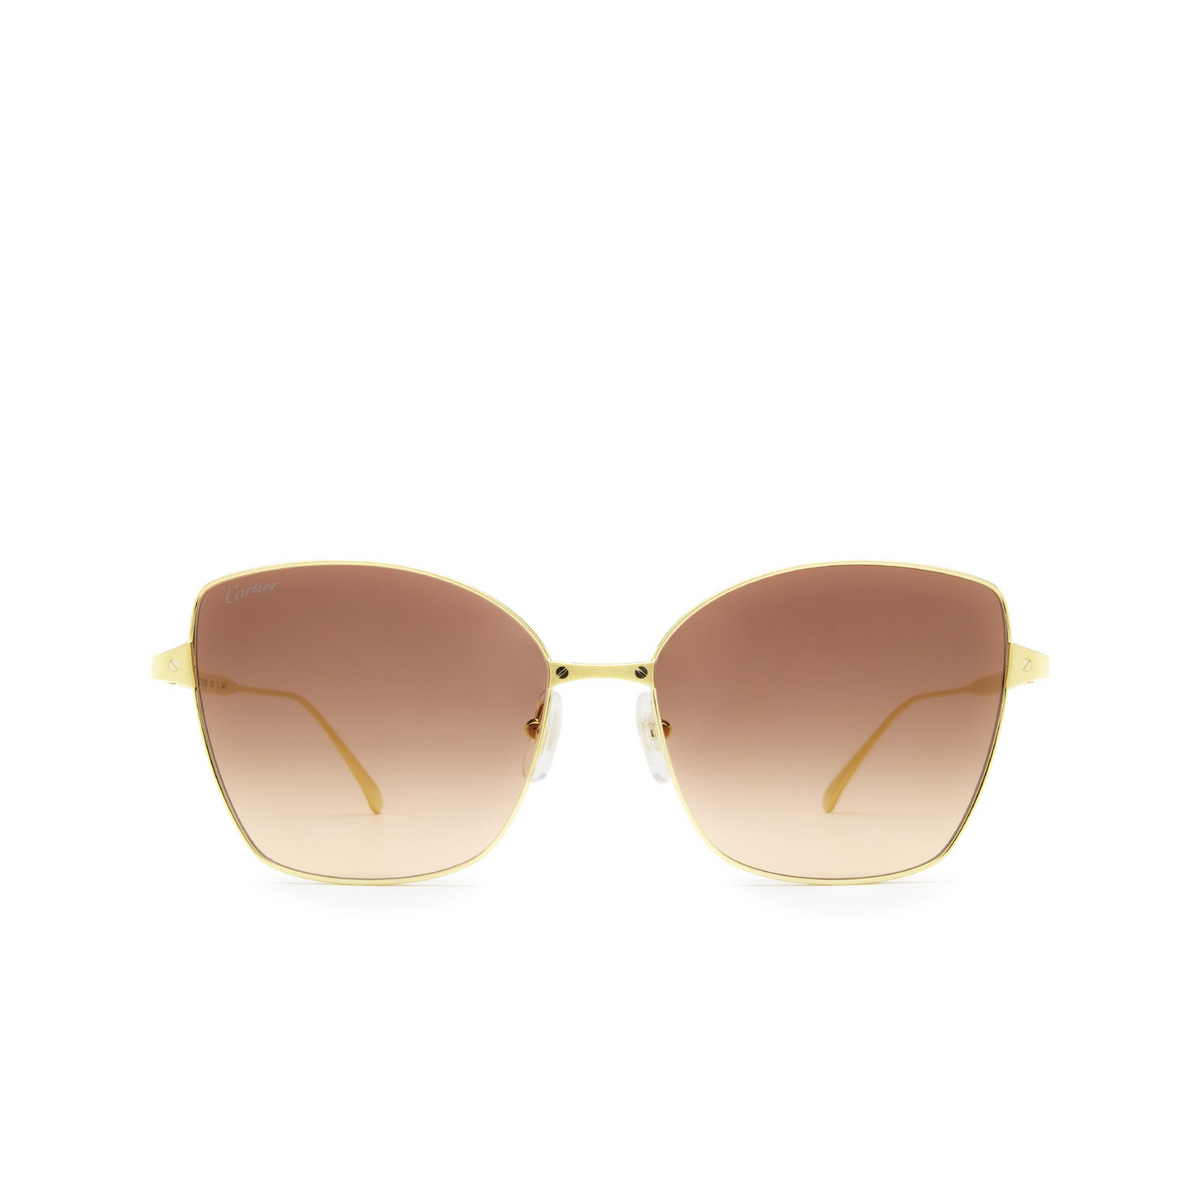 Cartier® Cat-eye Sunglasses: CT0328S color Gold 003 - front view.